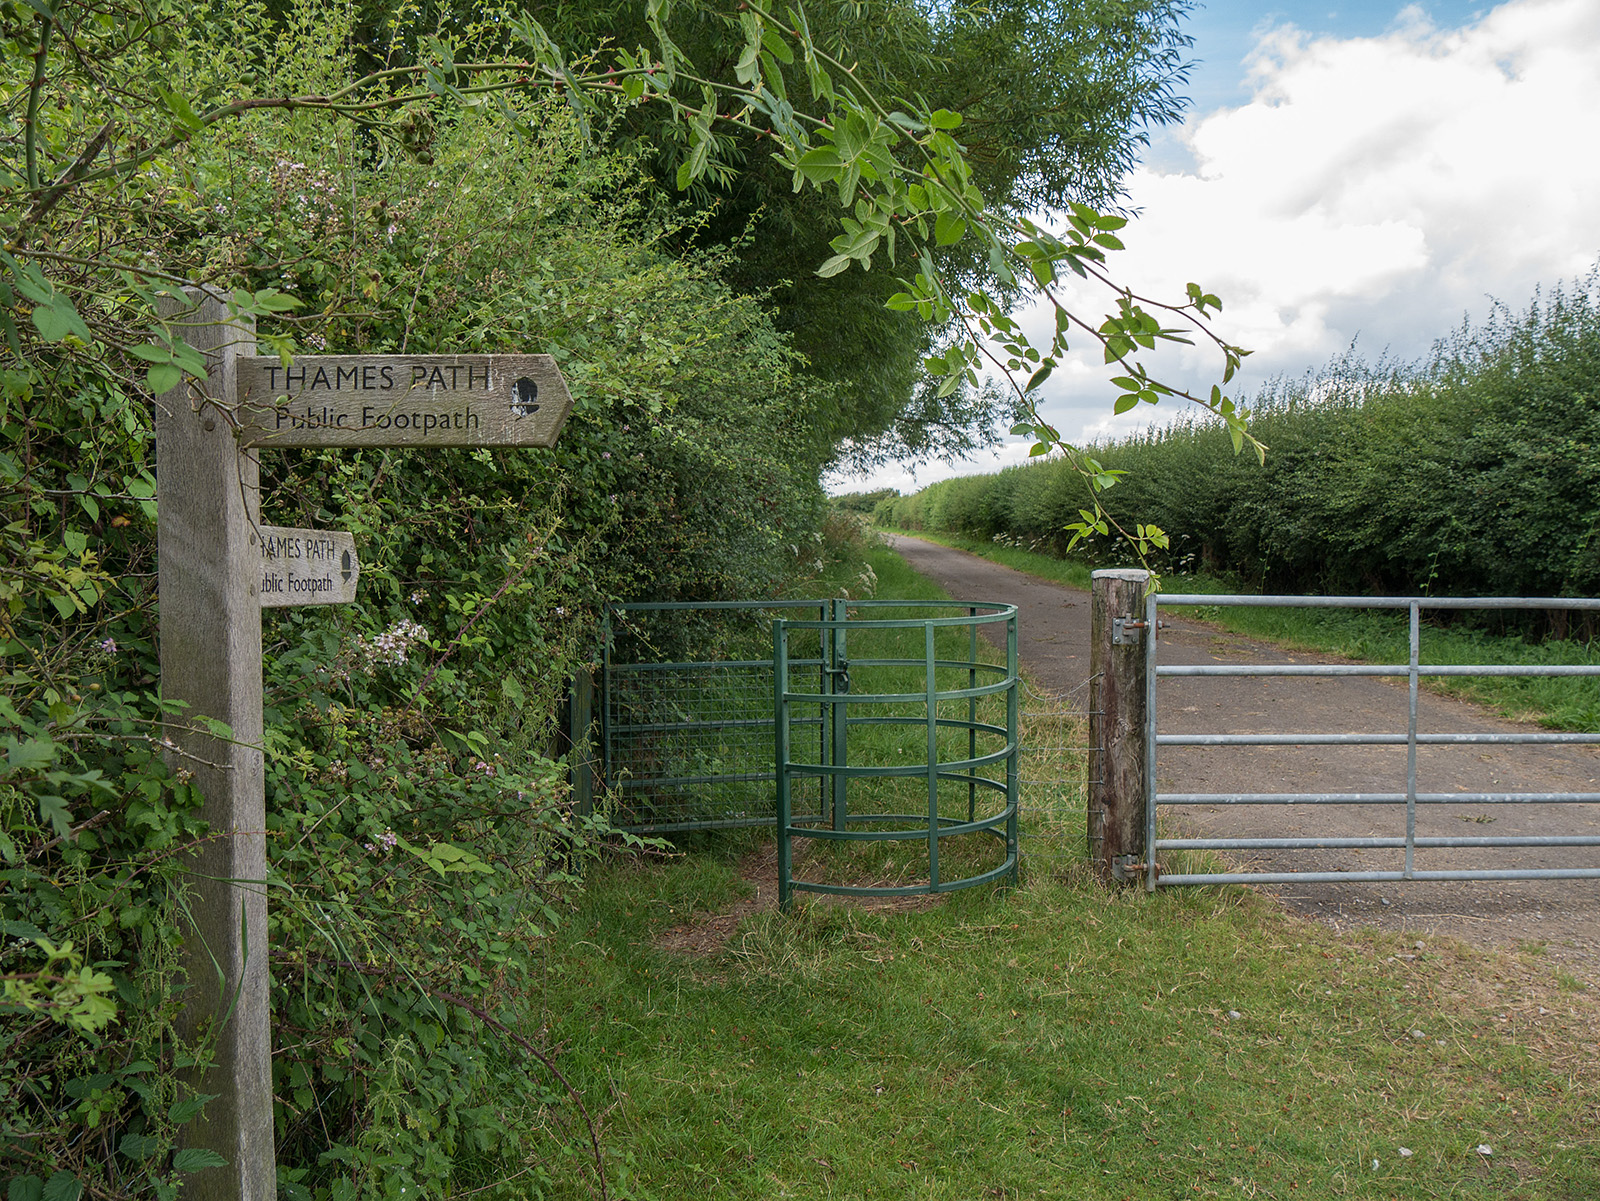 After a series of fields (to the right in this picture) the path reaches a tarmac road via a kissing gate